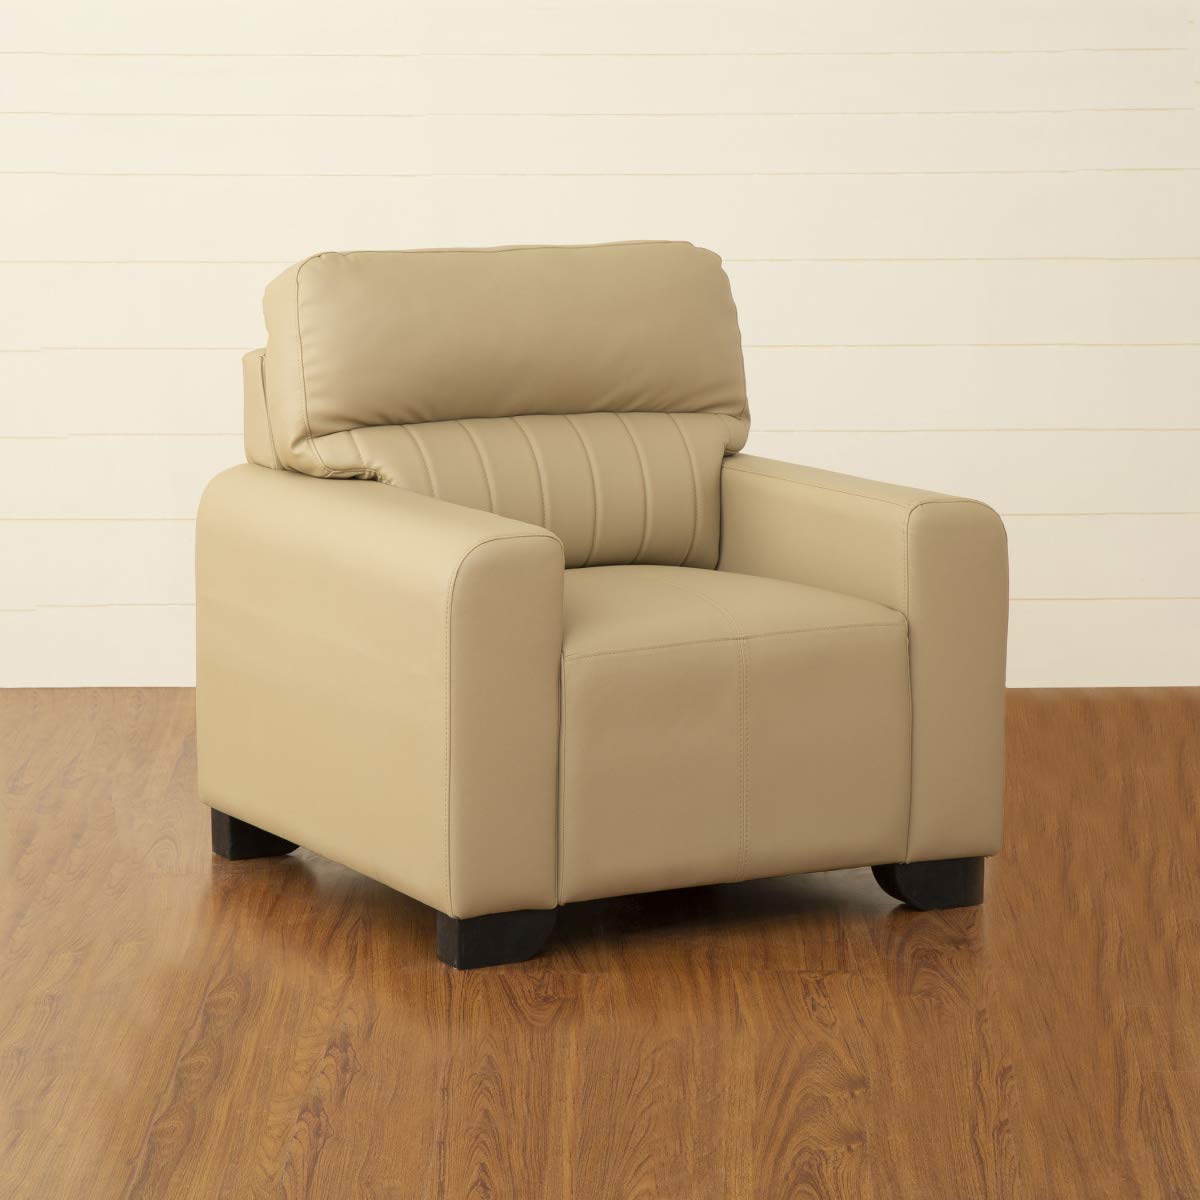 Home Centre Albury Faux leather Textured Arm Chair – Beige